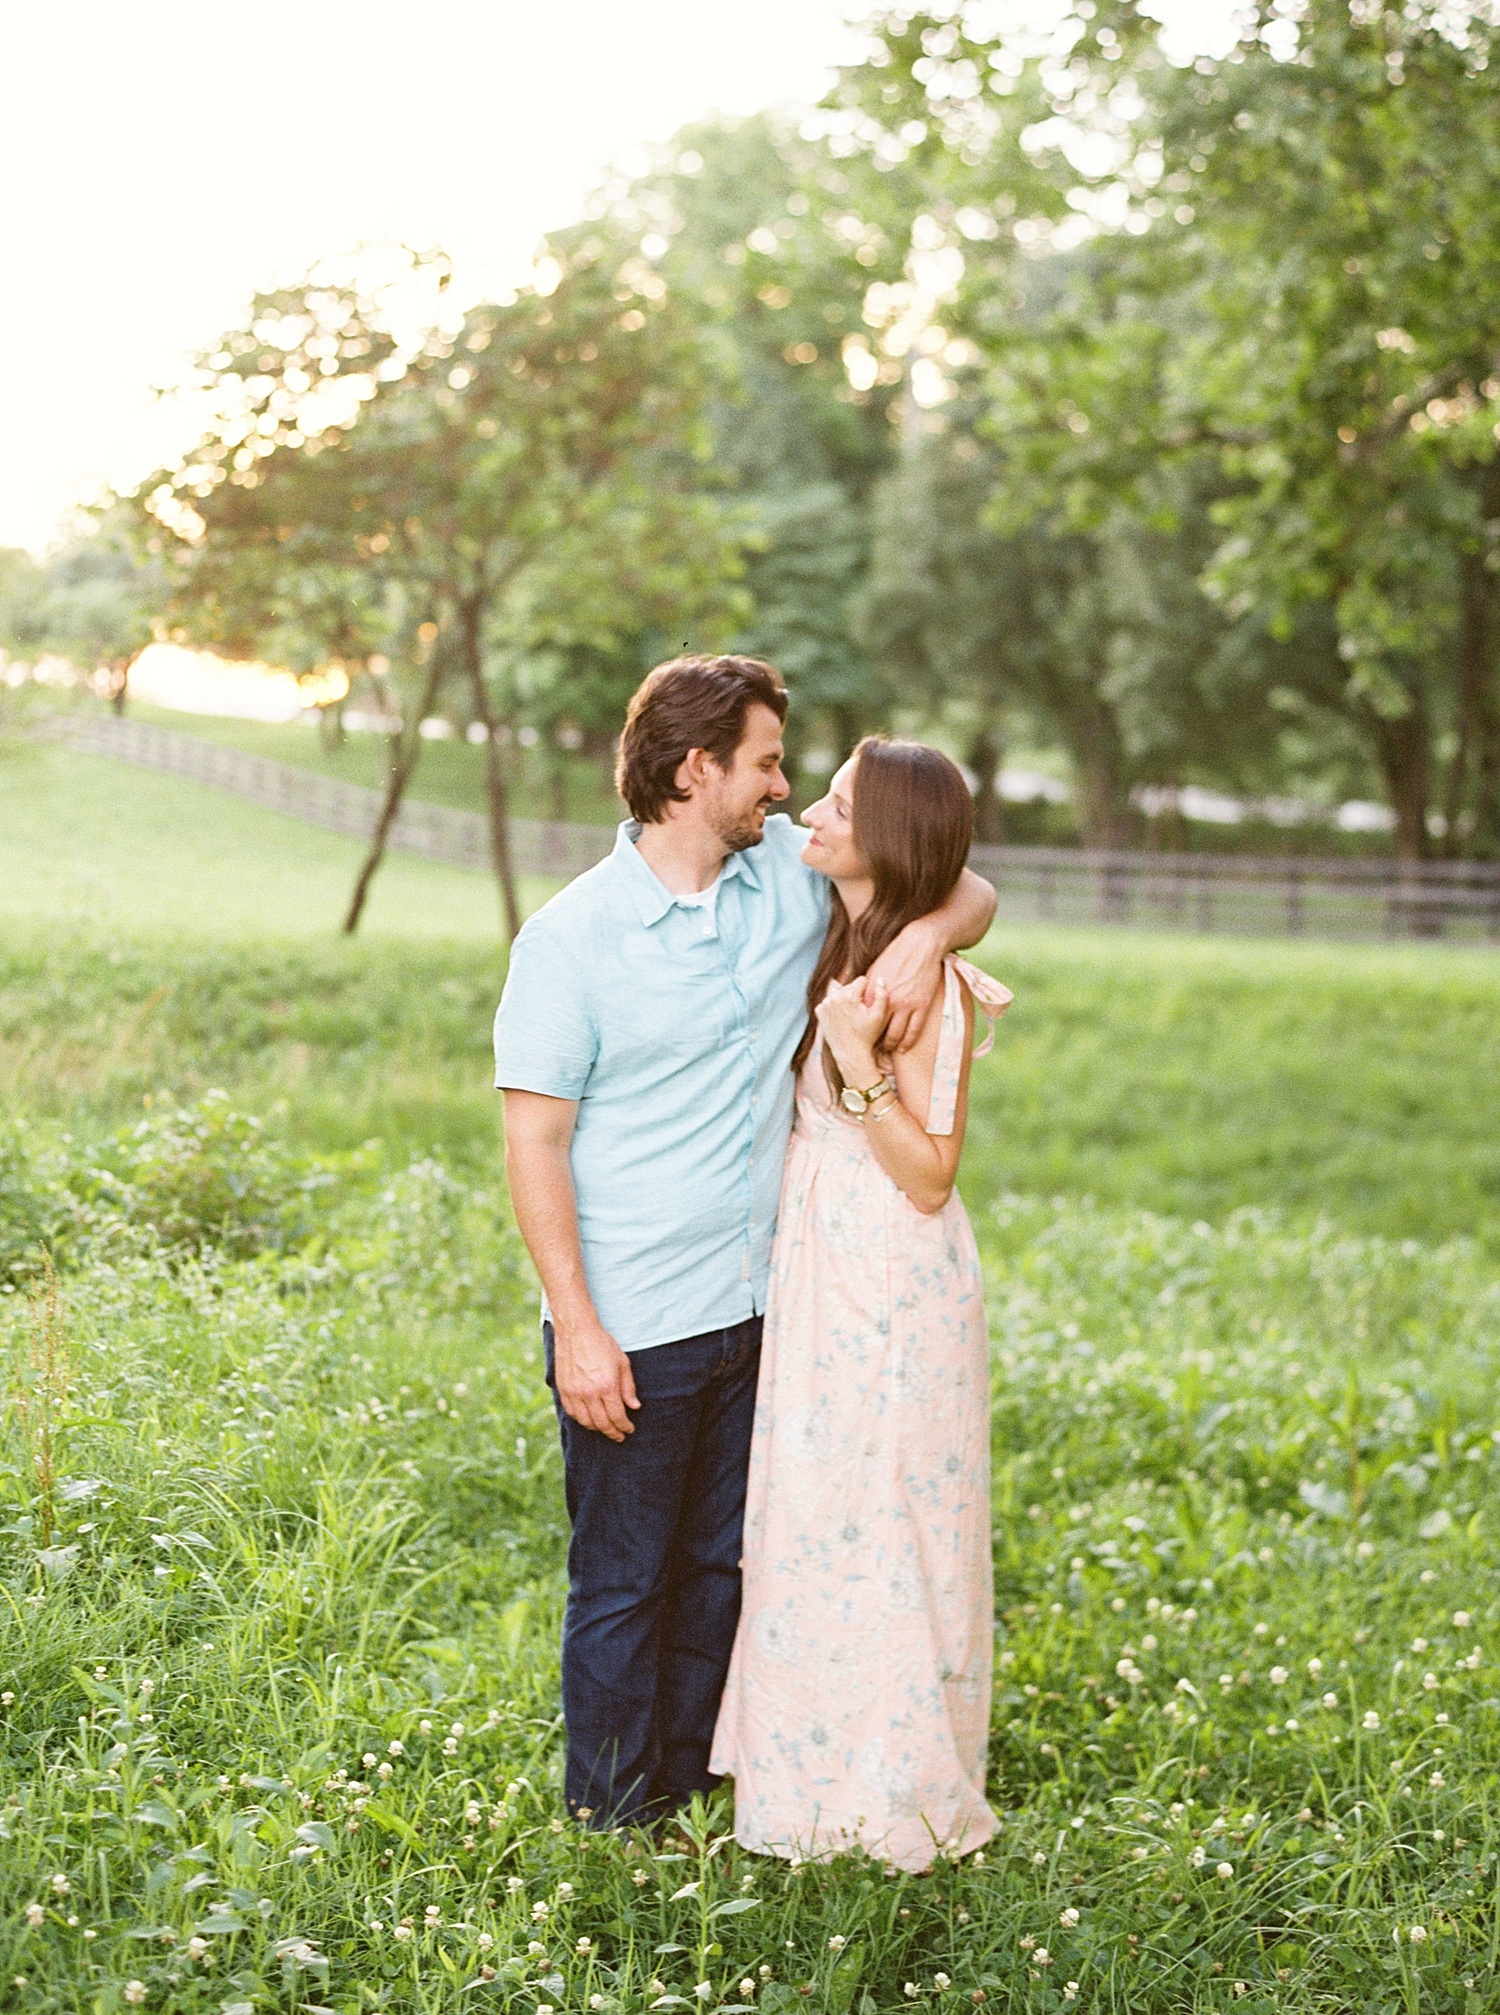 Downtown Lexington Engagement Session Talon Winery Picnic Engagement Session Gal Meets Glam Anthropologie Dress Laura Bodnar Photography Lexington Wedding Photographer Film Photography_0019-1.jpg